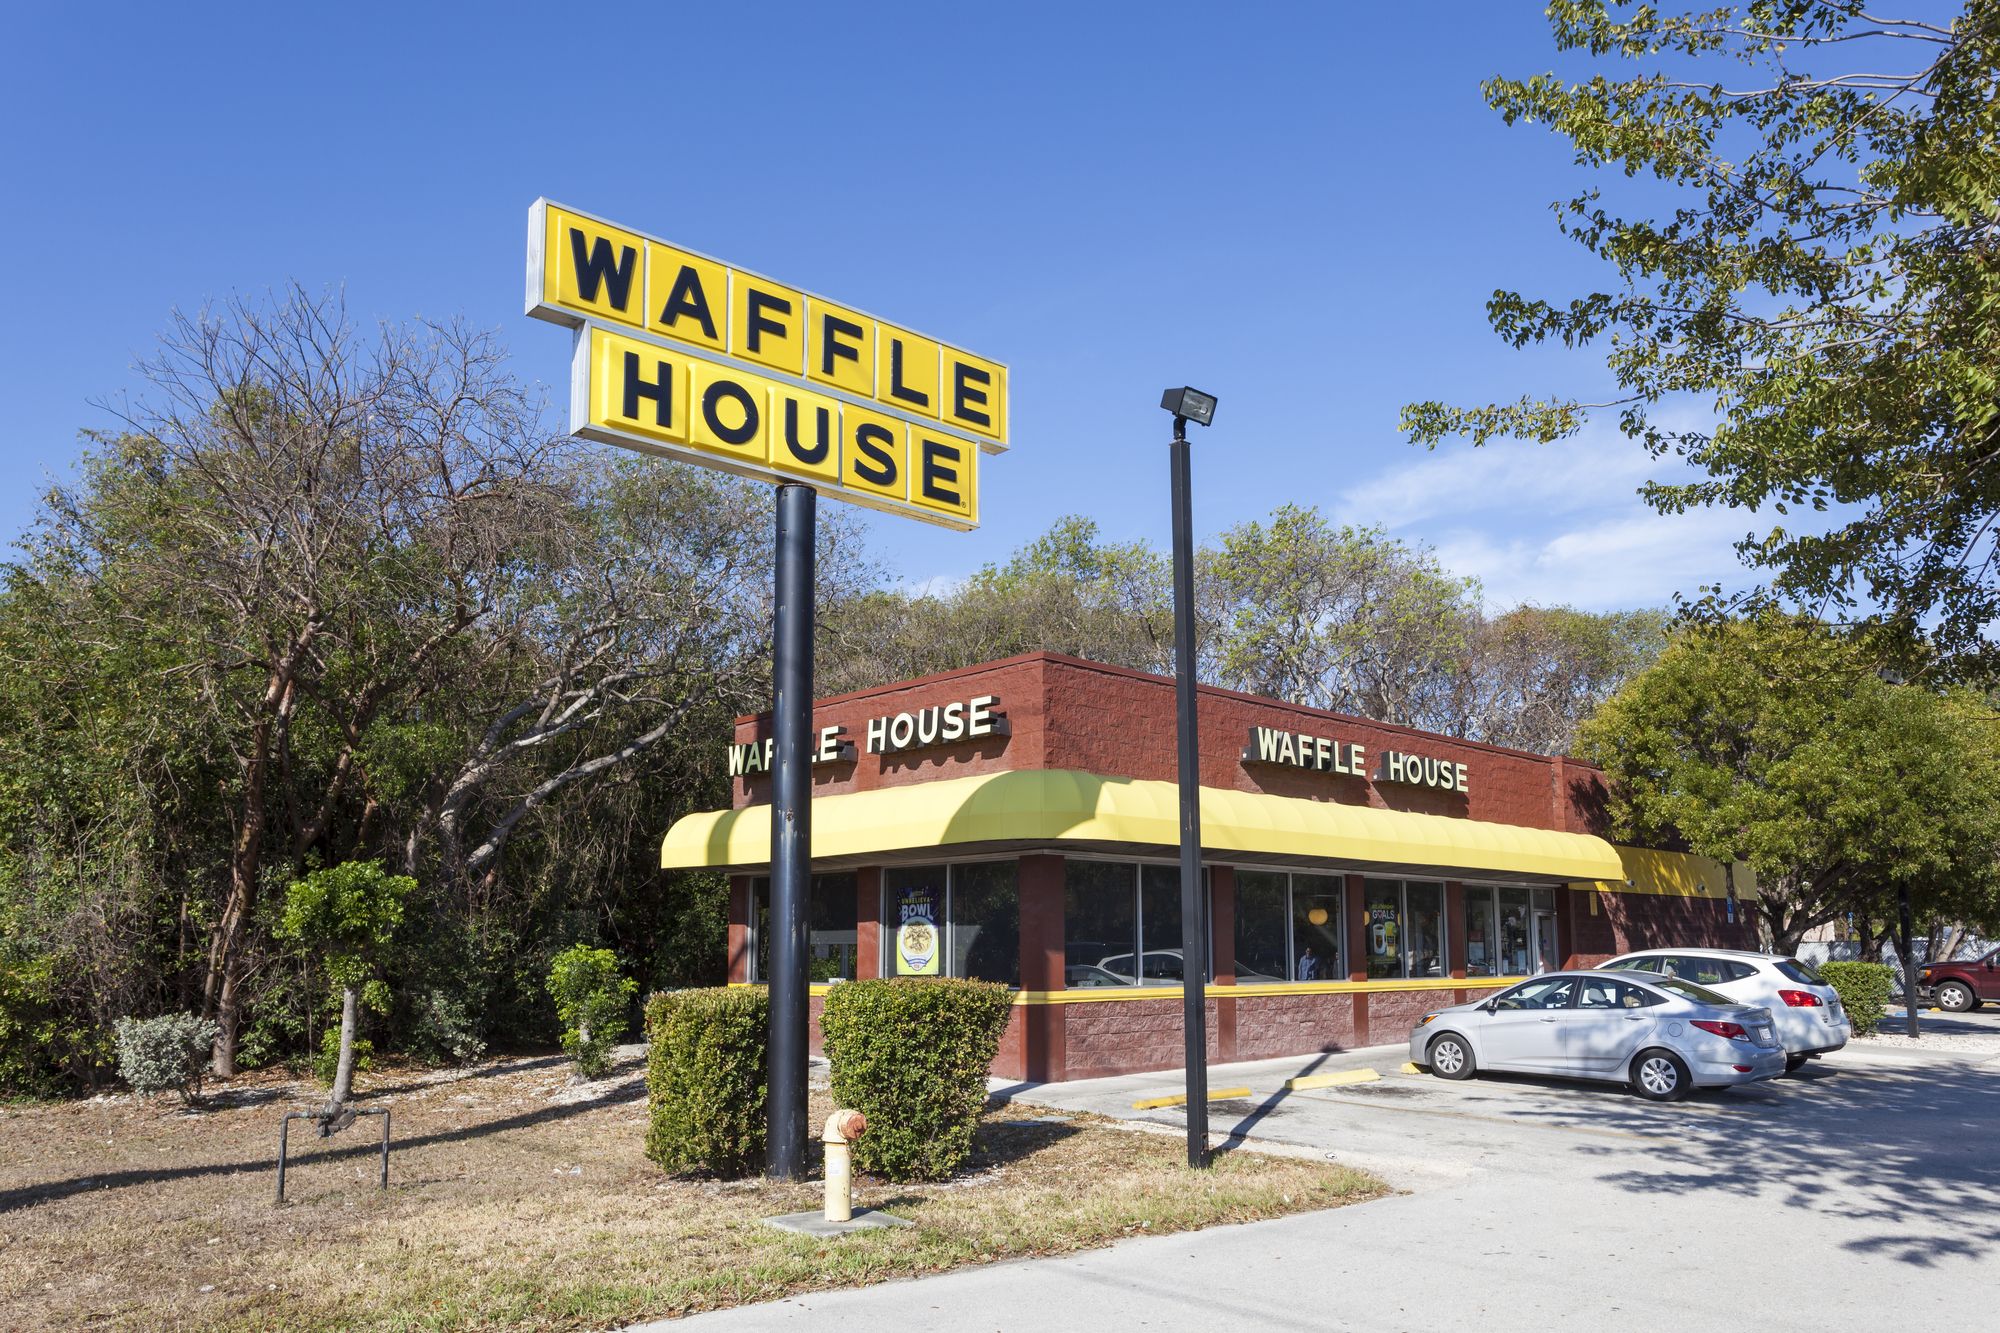 Key Largo, Fl, USA - March 16, 2017: Exterior view of a Waffle House restaurant in Key Largo. Florida, United States